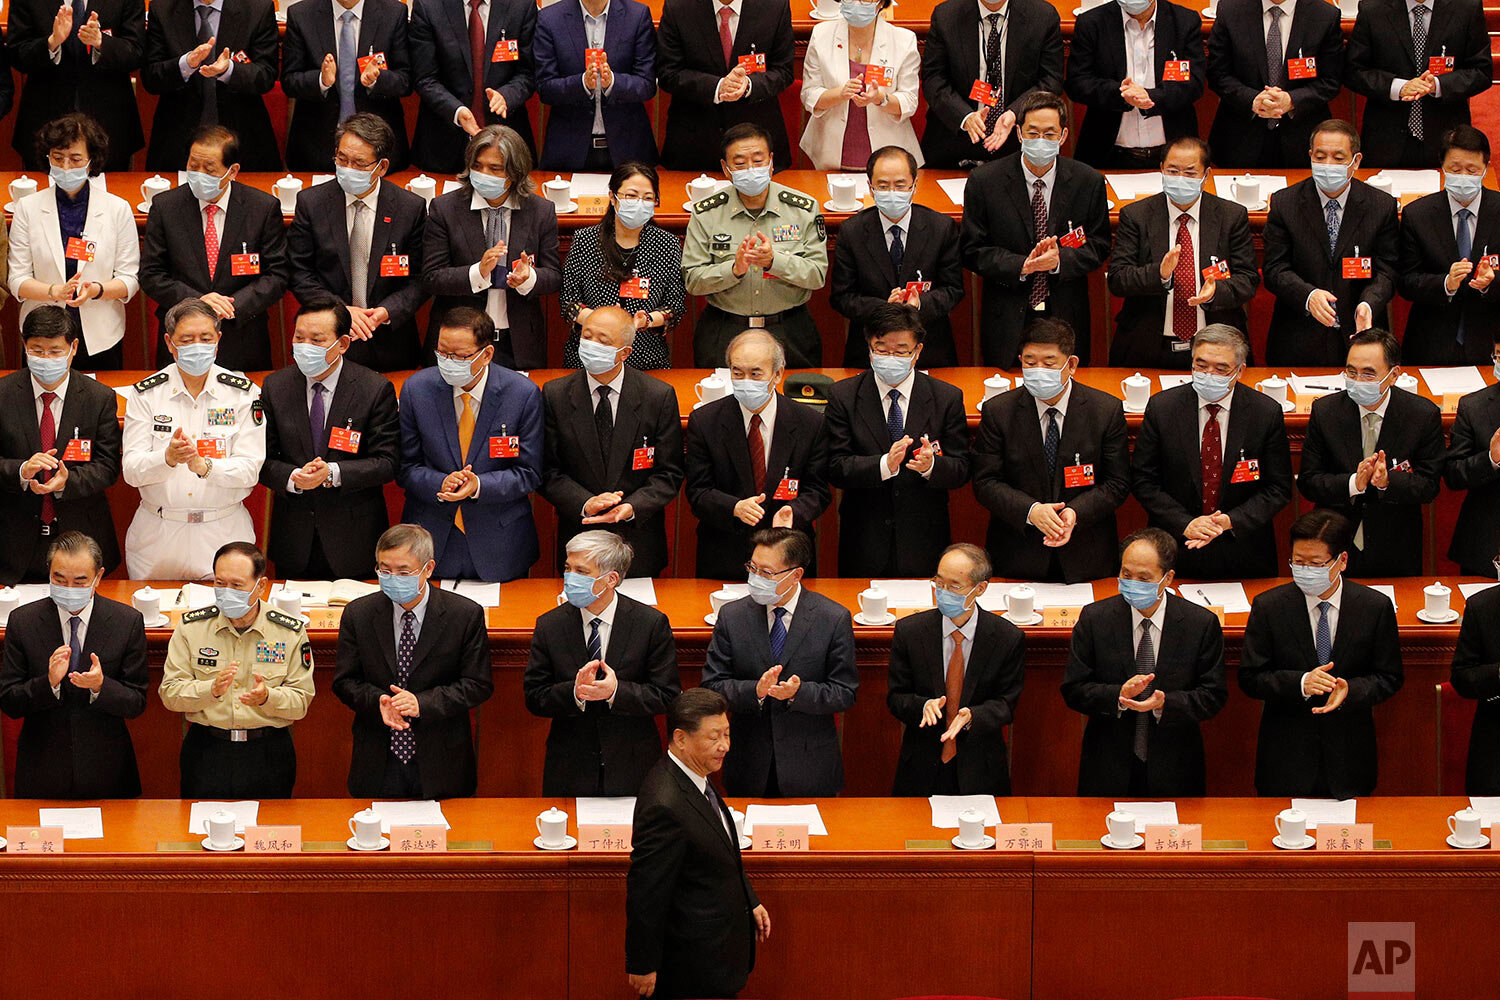  Chinese President Xi Jinping, bottom, arrives for the closing session of the Chinese People's Political Consultative Conference (CPPCC) at the Great Hall of the People in Beijing on Wednesday, May 27, 2020. (AP Photo/Andy Wong) 